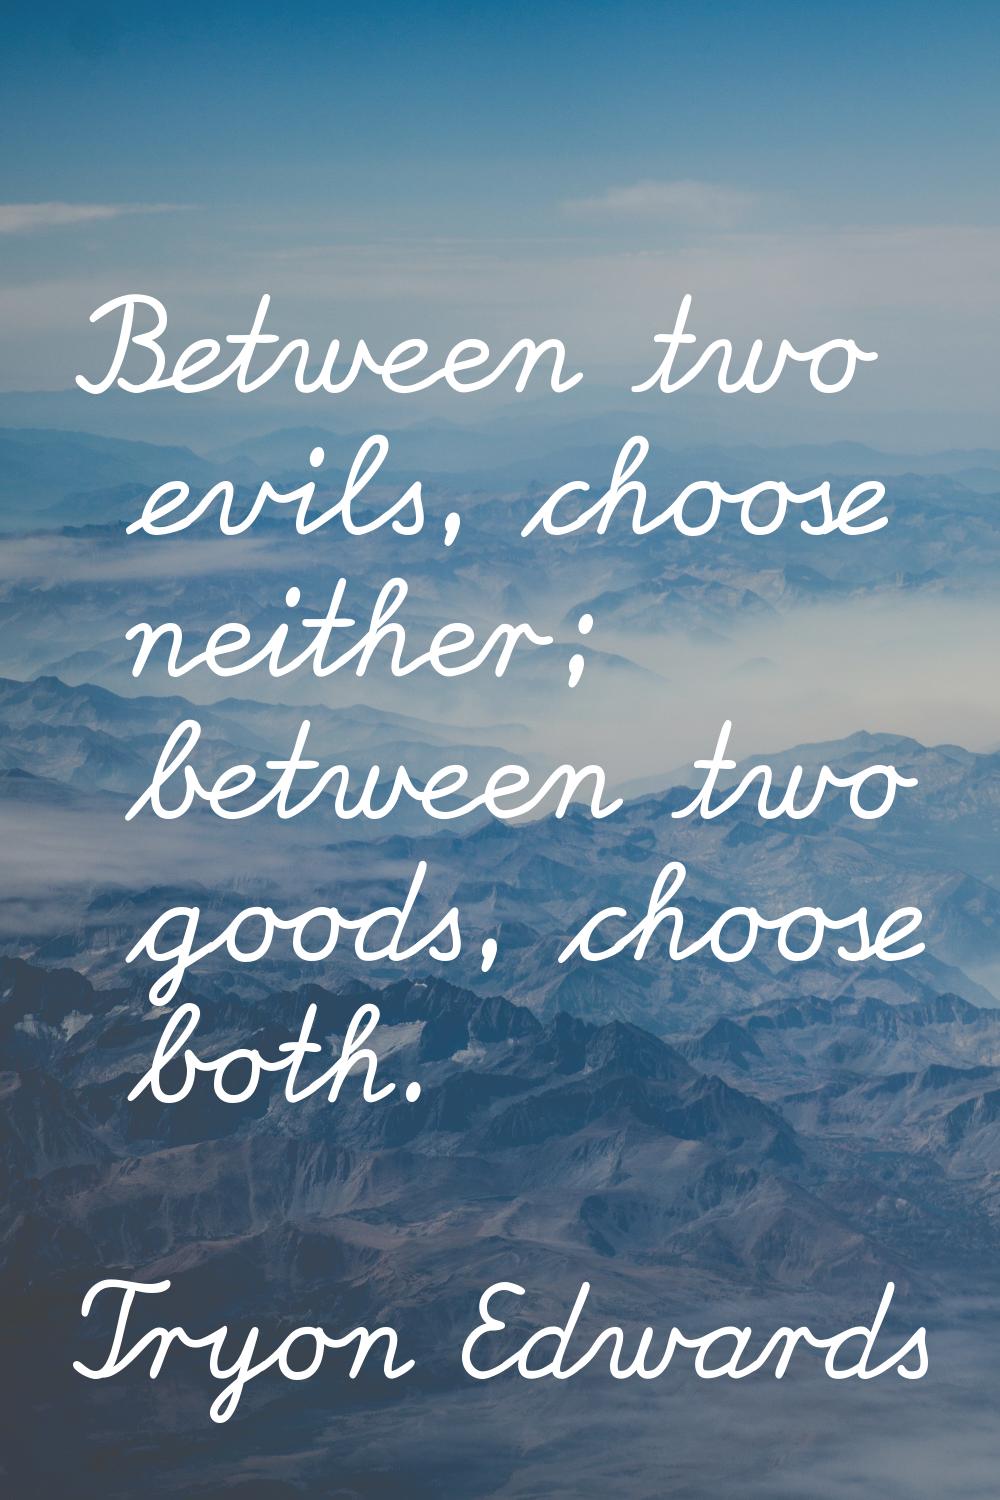 Between two evils, choose neither; between two goods, choose both.